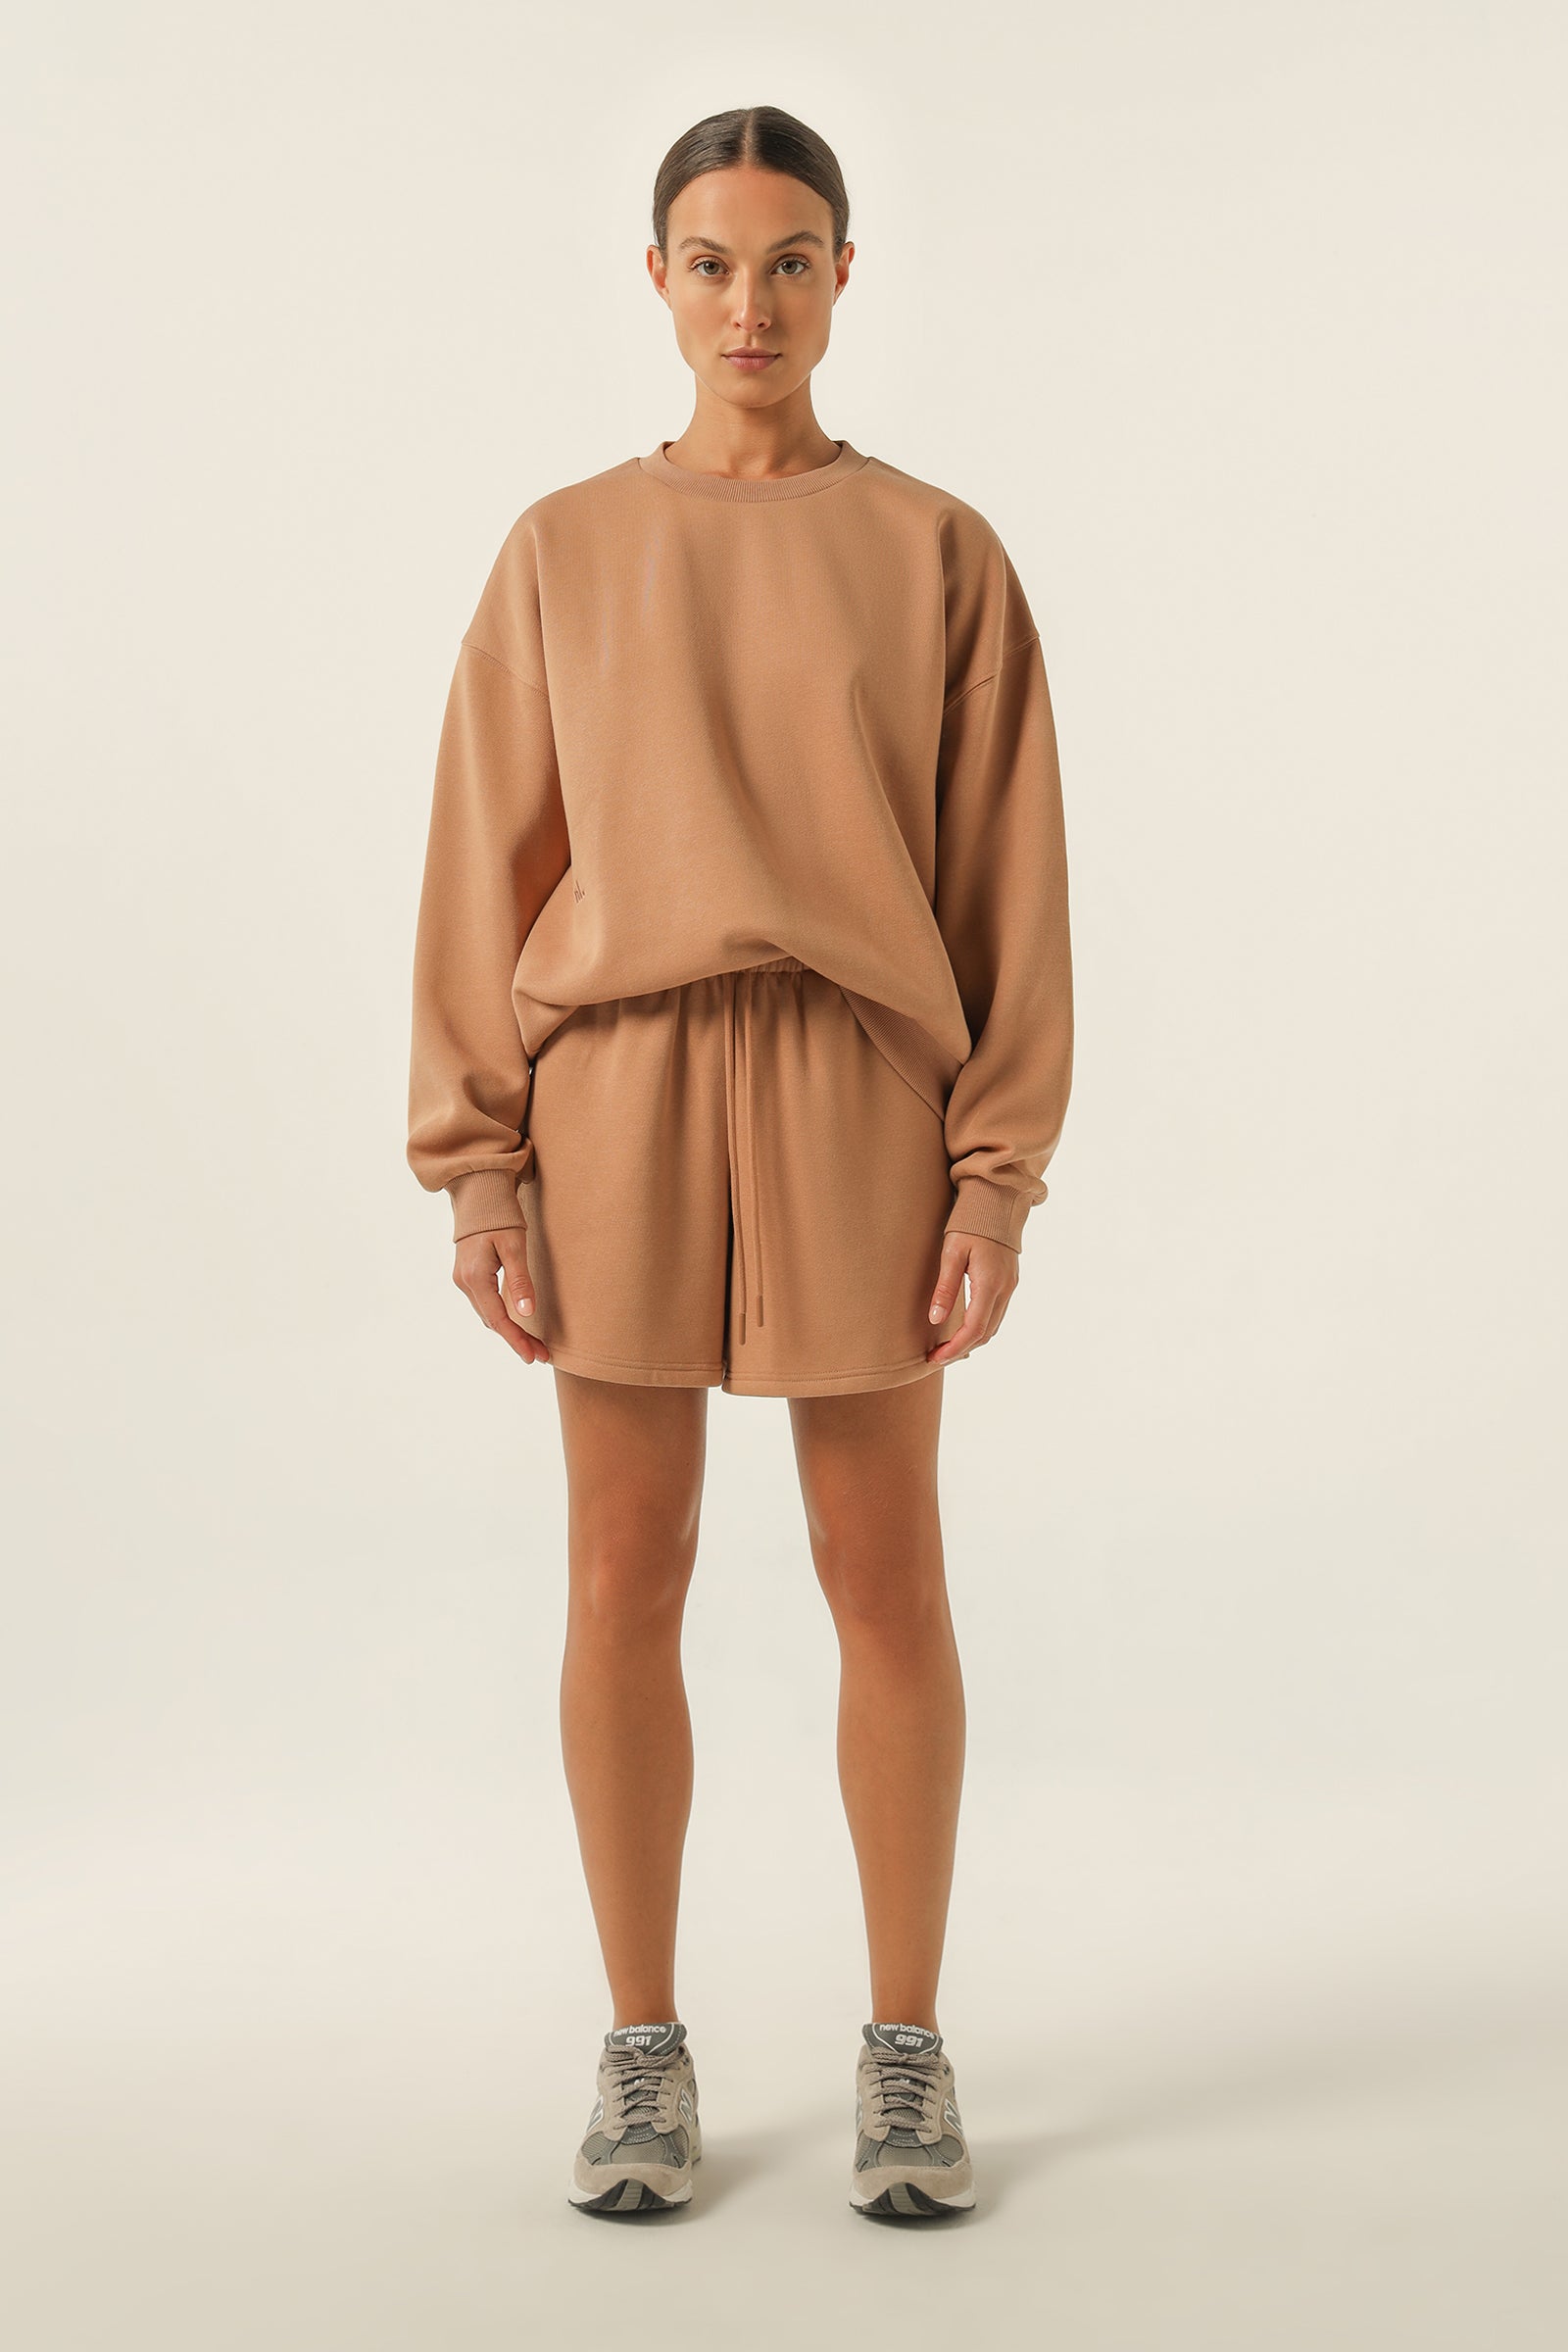 Nude Lucy Carter Curated Short In A Brown Coffee Colour 